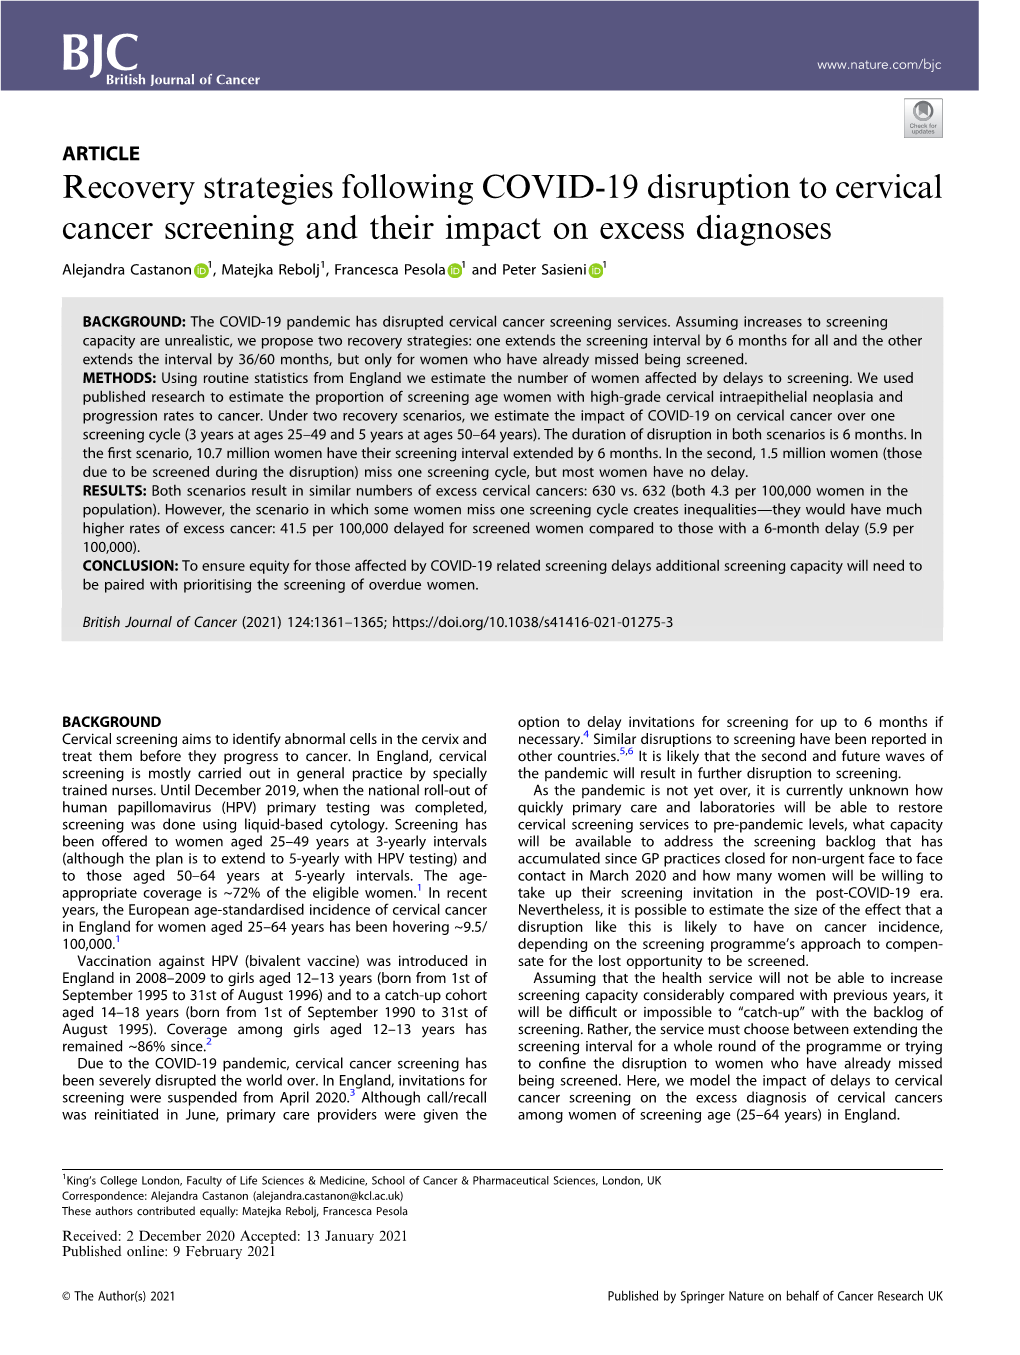 Recovery Strategies Following COVID-19 Disruption to Cervical Cancer Screening and Their Impact on Excess Diagnoses